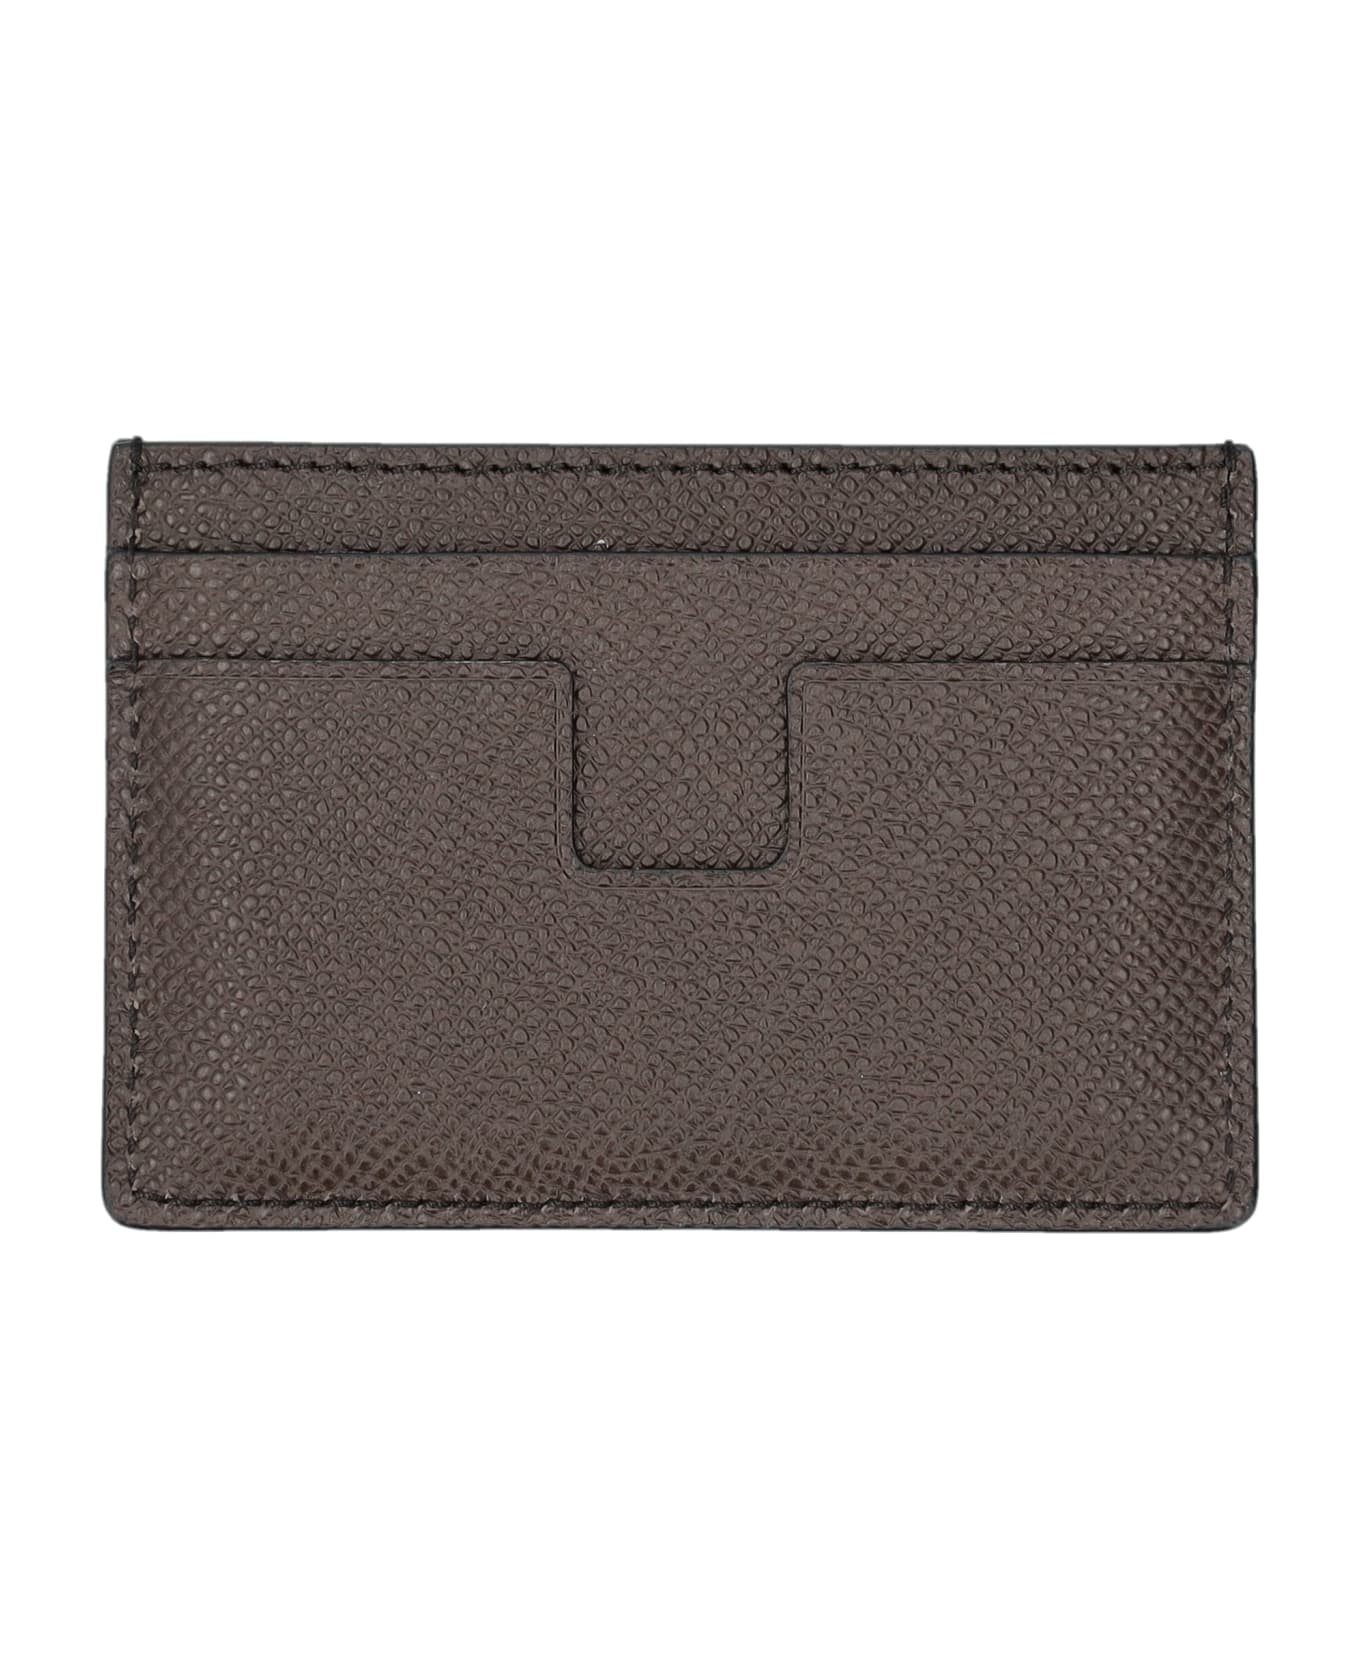 Tom Ford Small Grain Leather Cardholder - Brown 財布